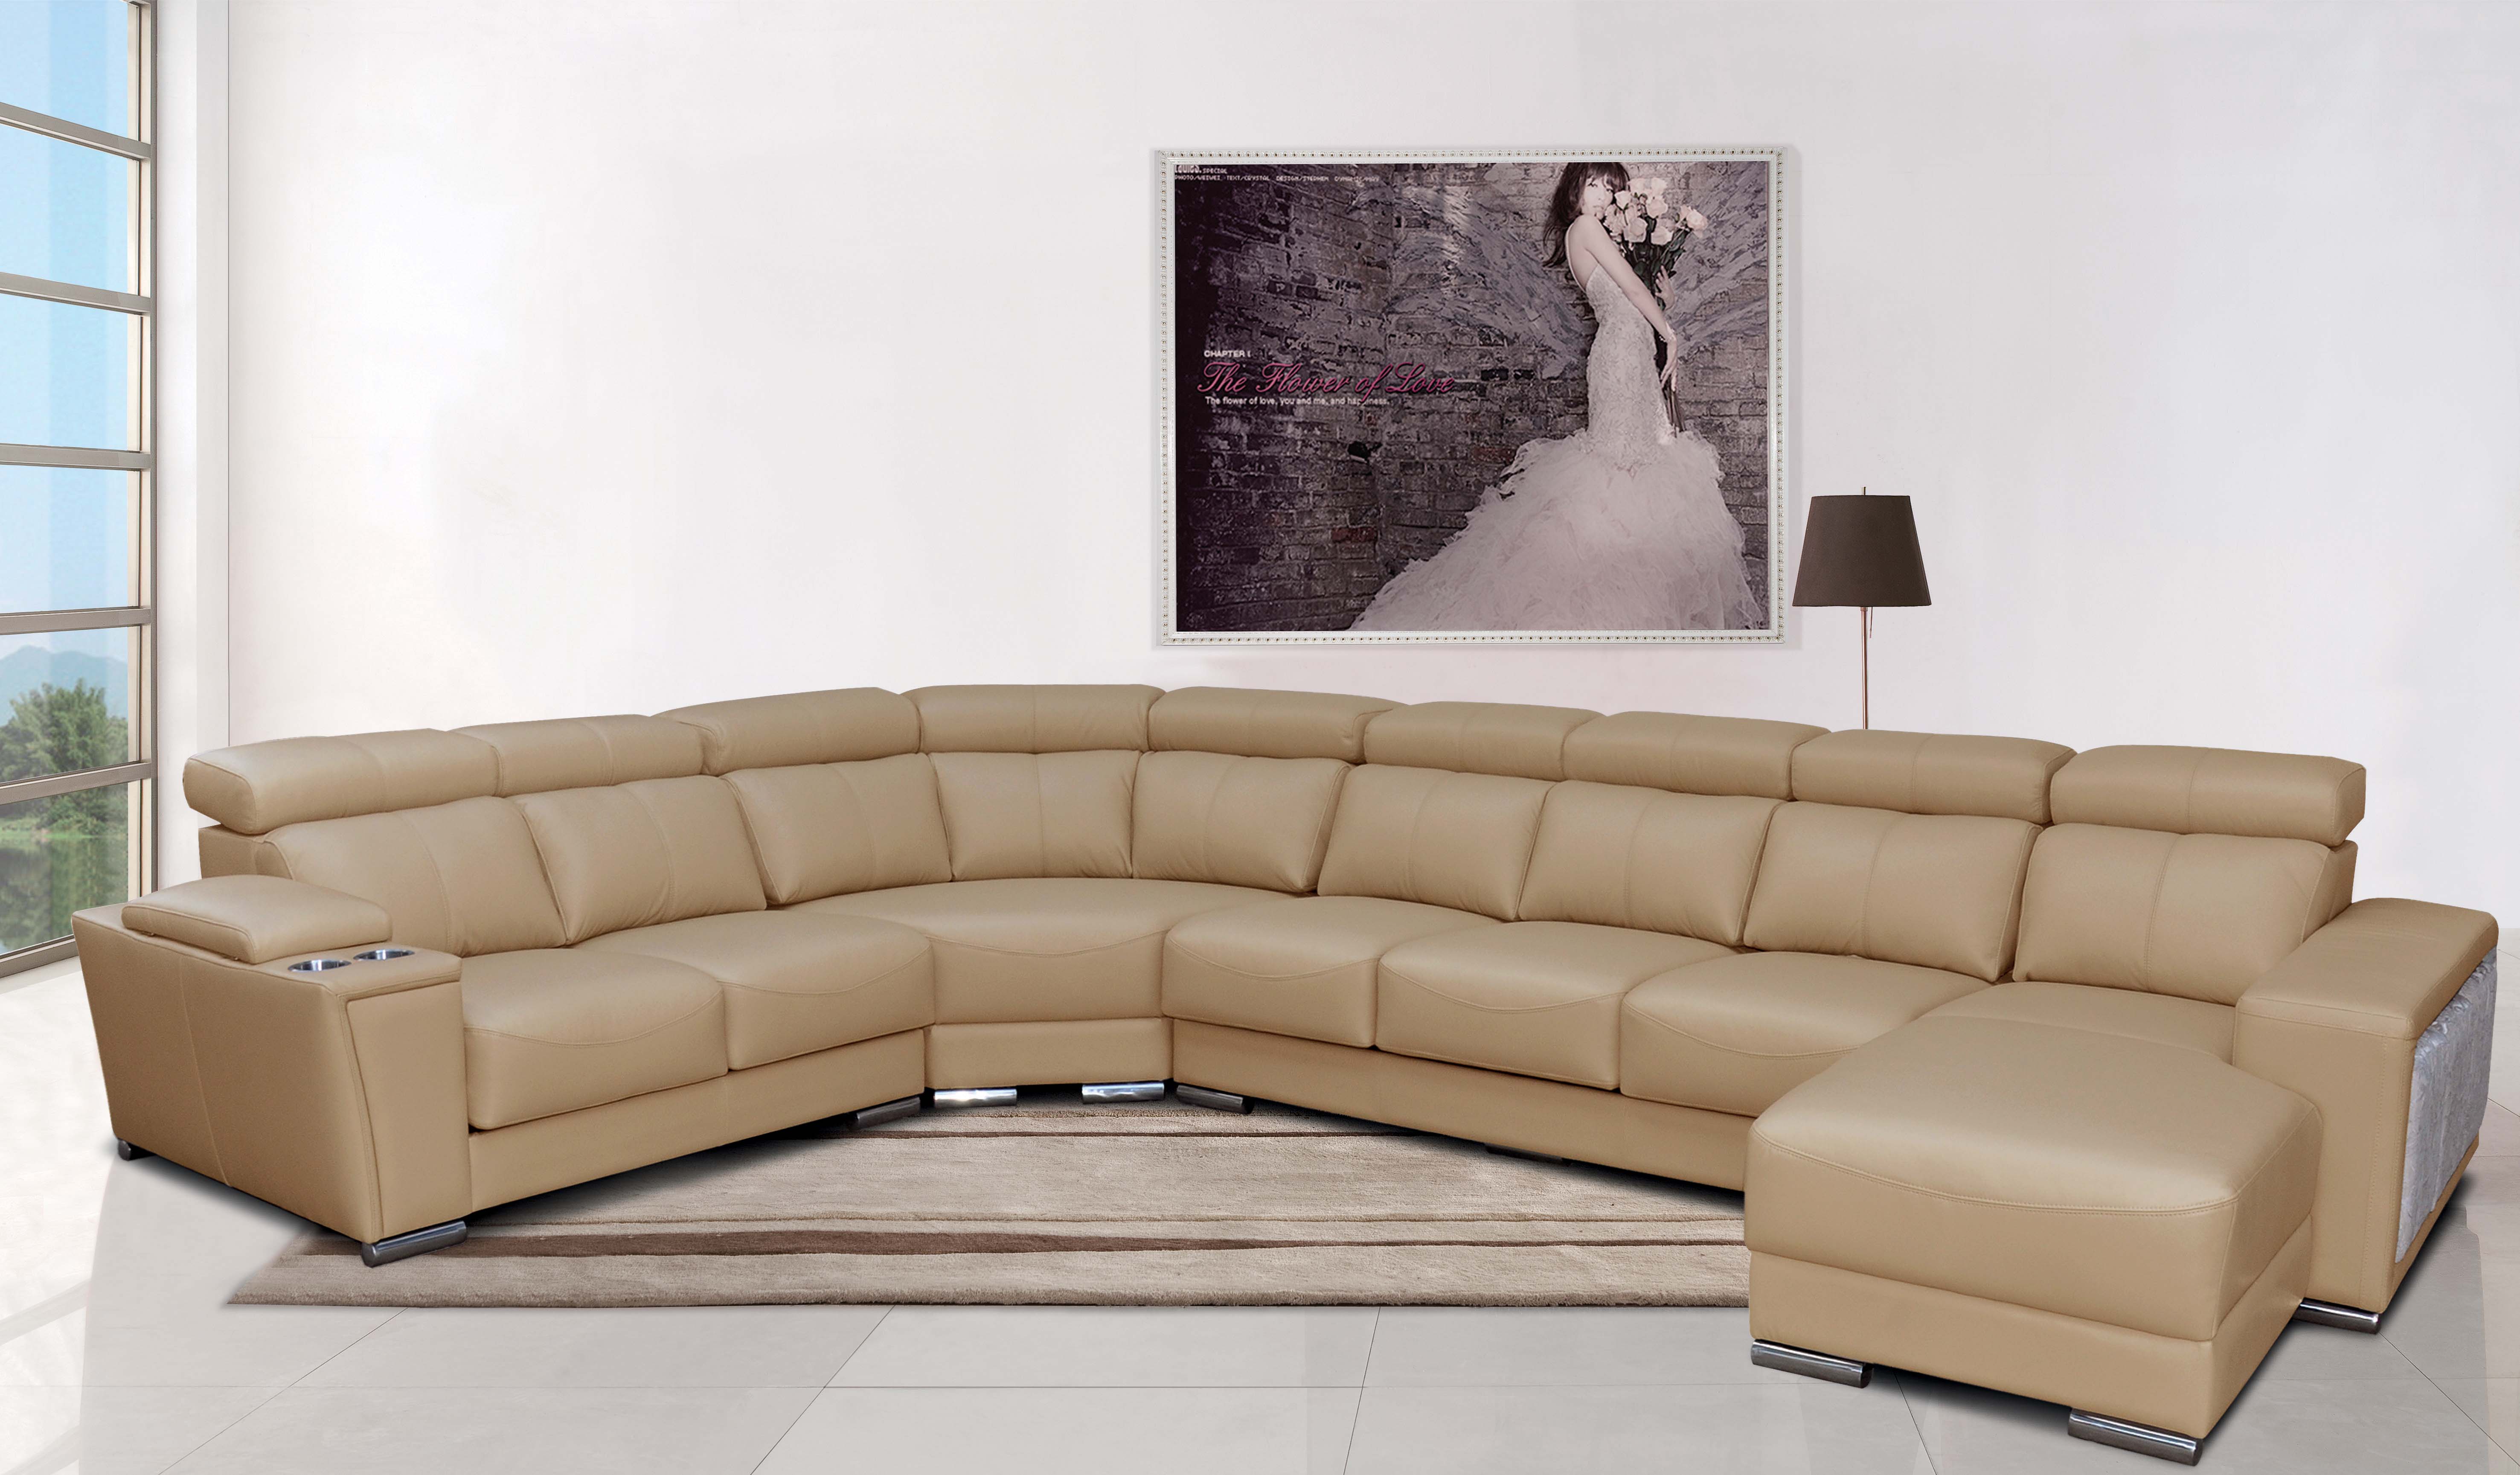 Living Room Furniture Sofas Loveseats and Chairs 8312 Sectional with Sliding Seats